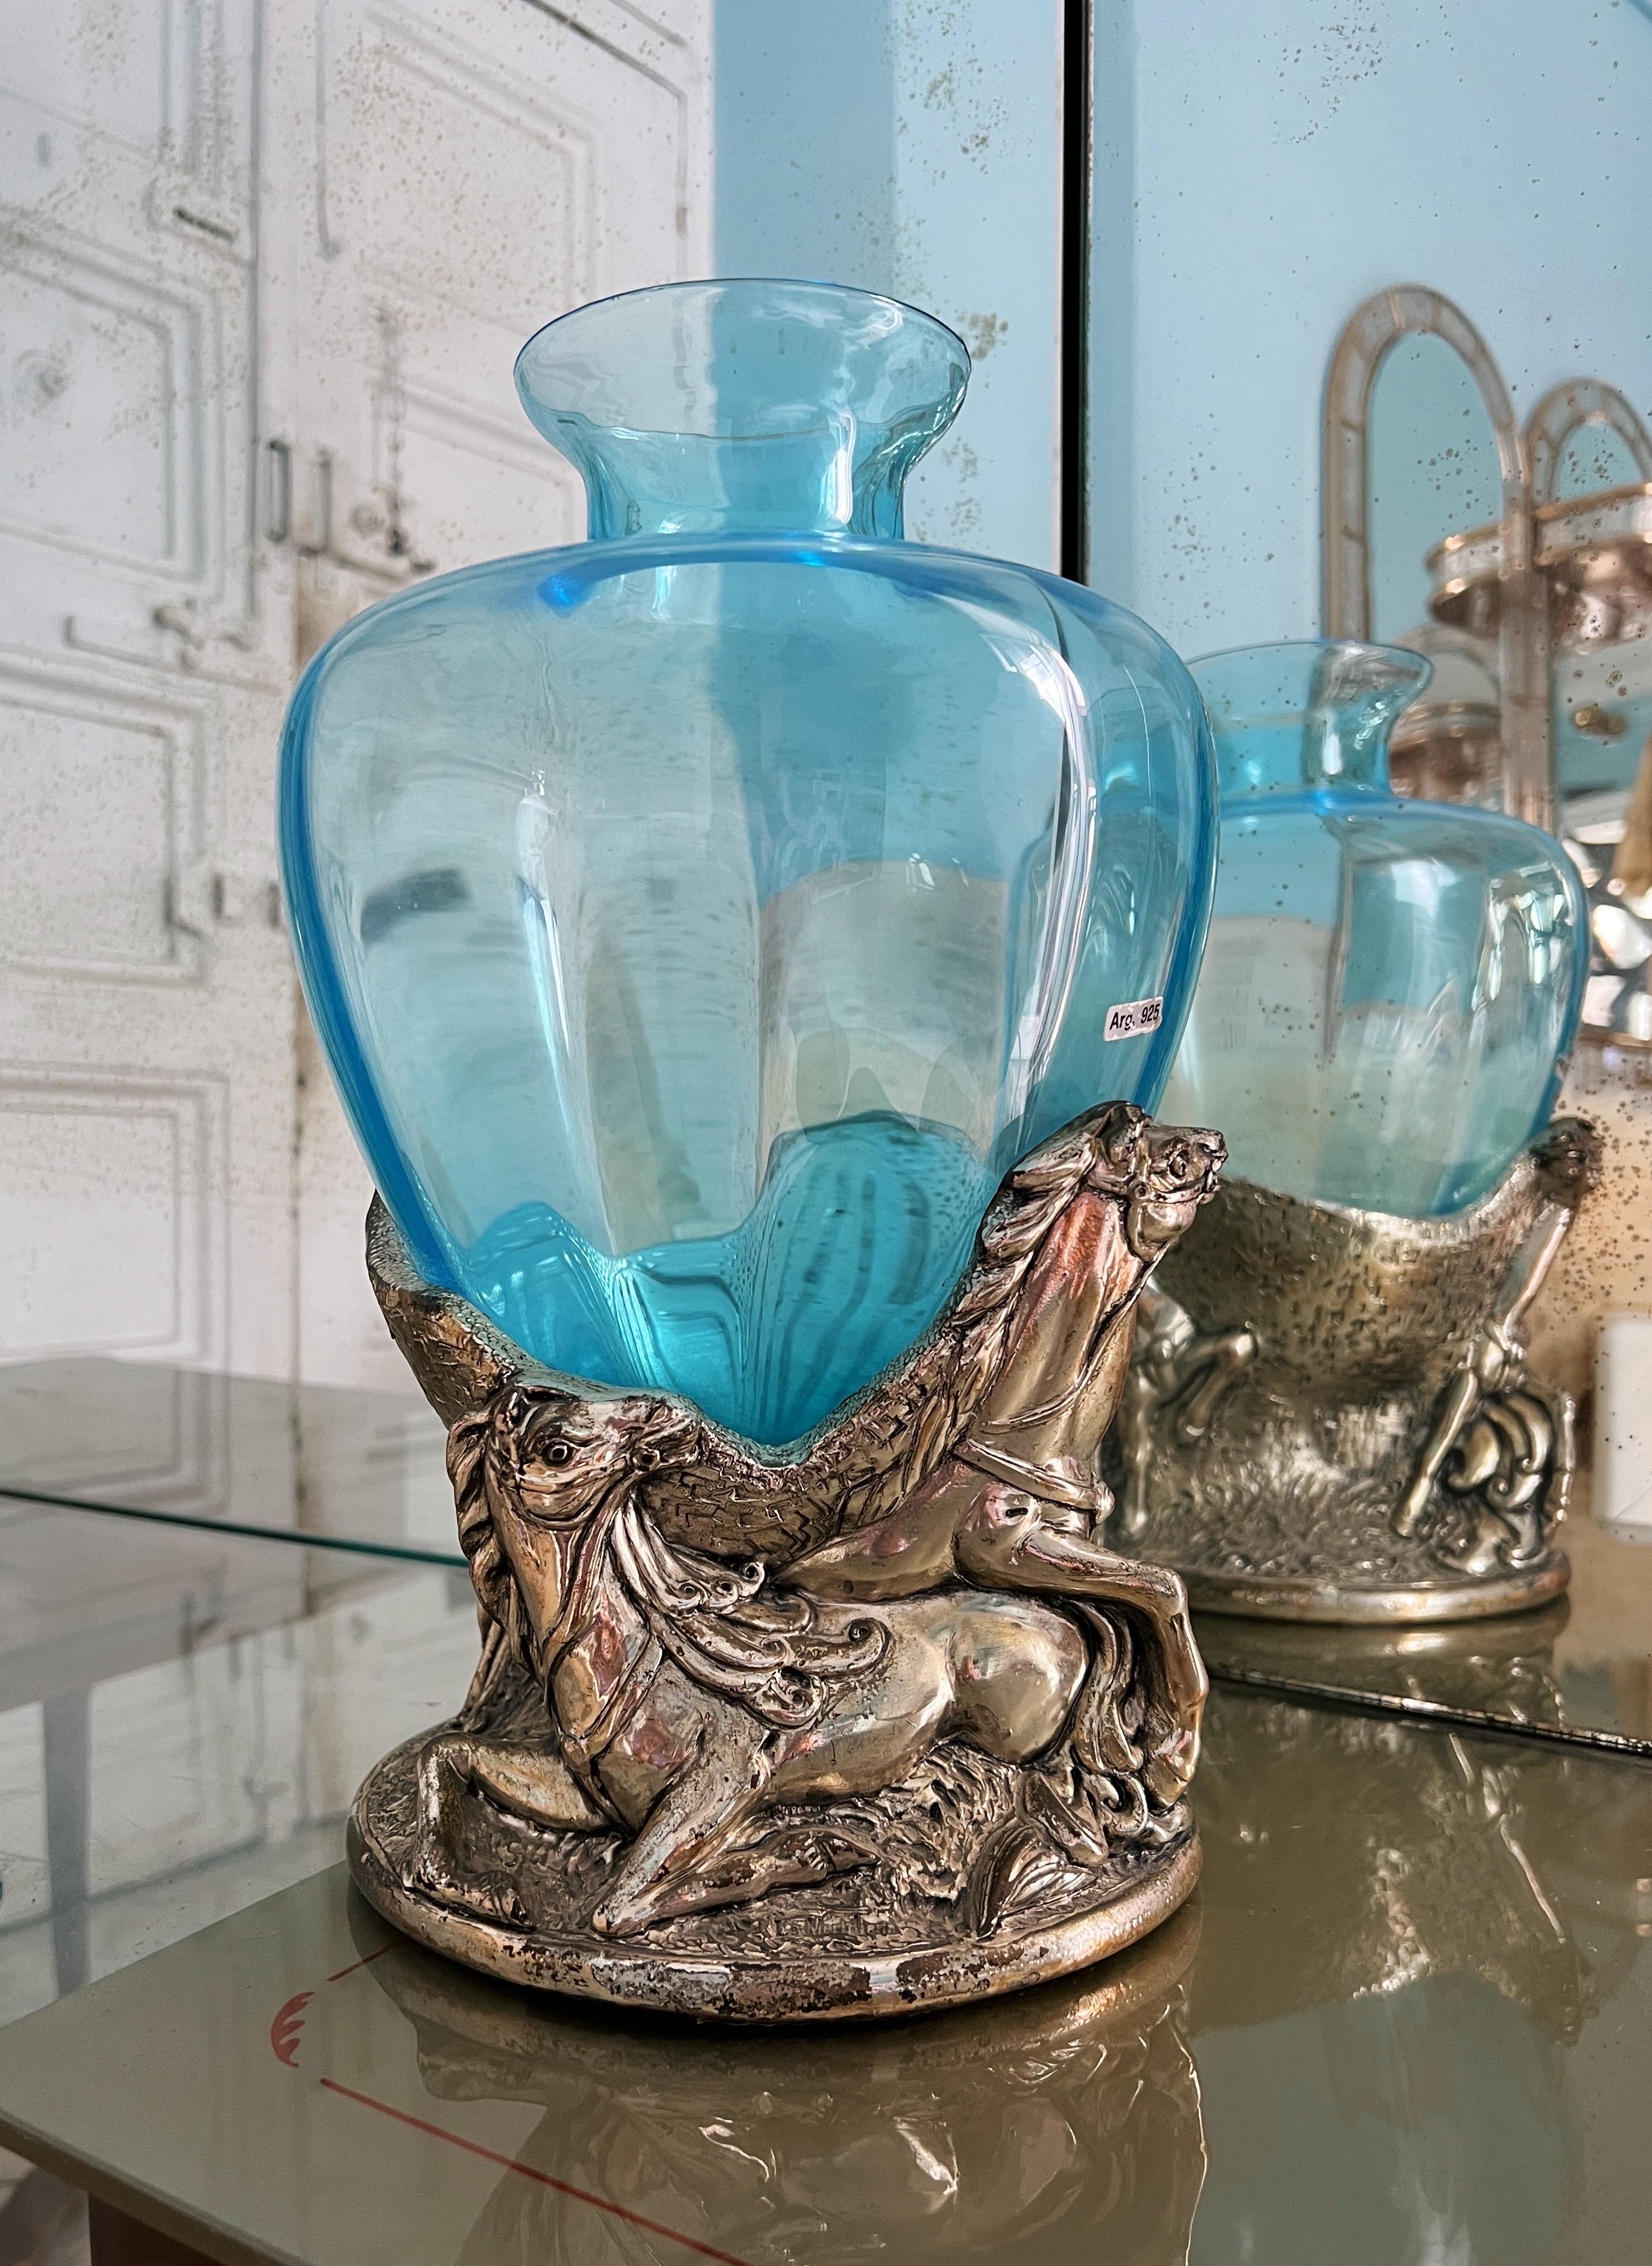 This exquisite mid-century Murano vase, adorned in a striking sky blue hue, graces an elegant sculpture featuring horses. The vase is believed to be plated in Silver 925, although the stamps on it are somewhat challenging to decipher.

The